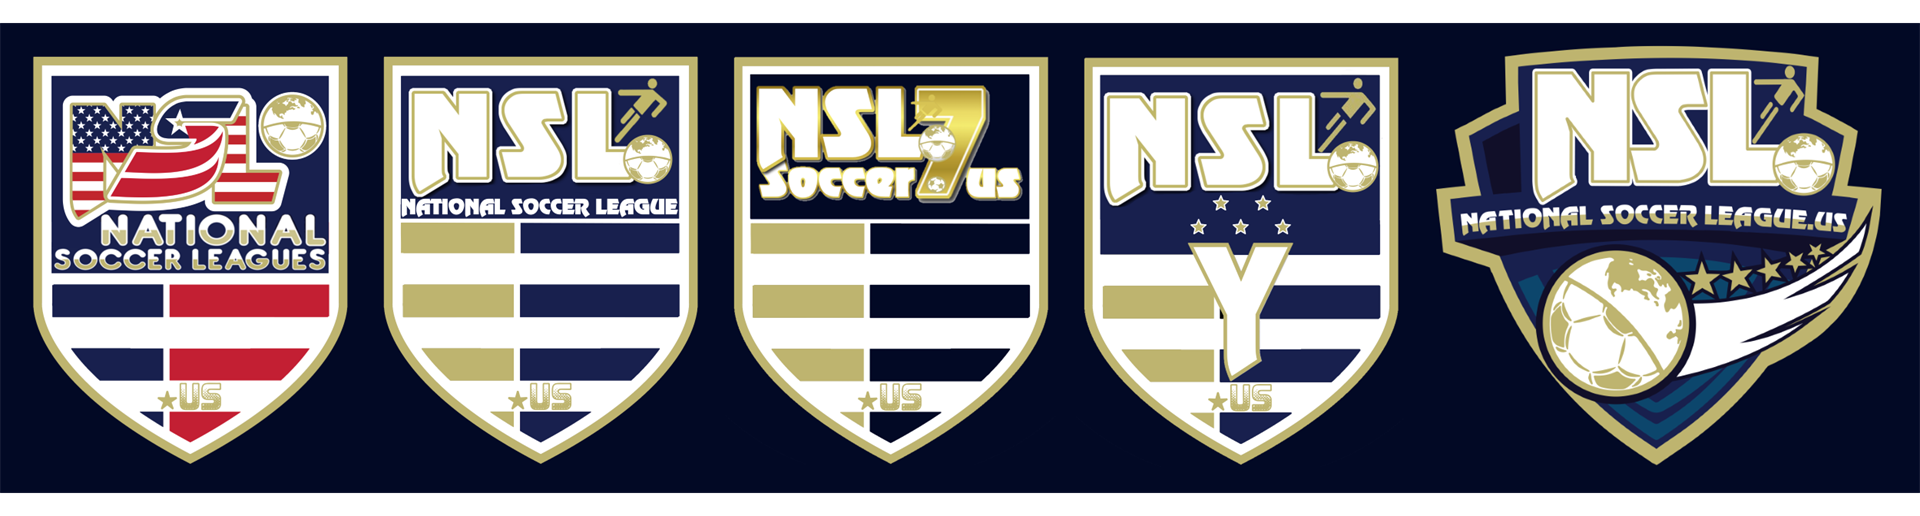 National Soccer League Tryout Registration